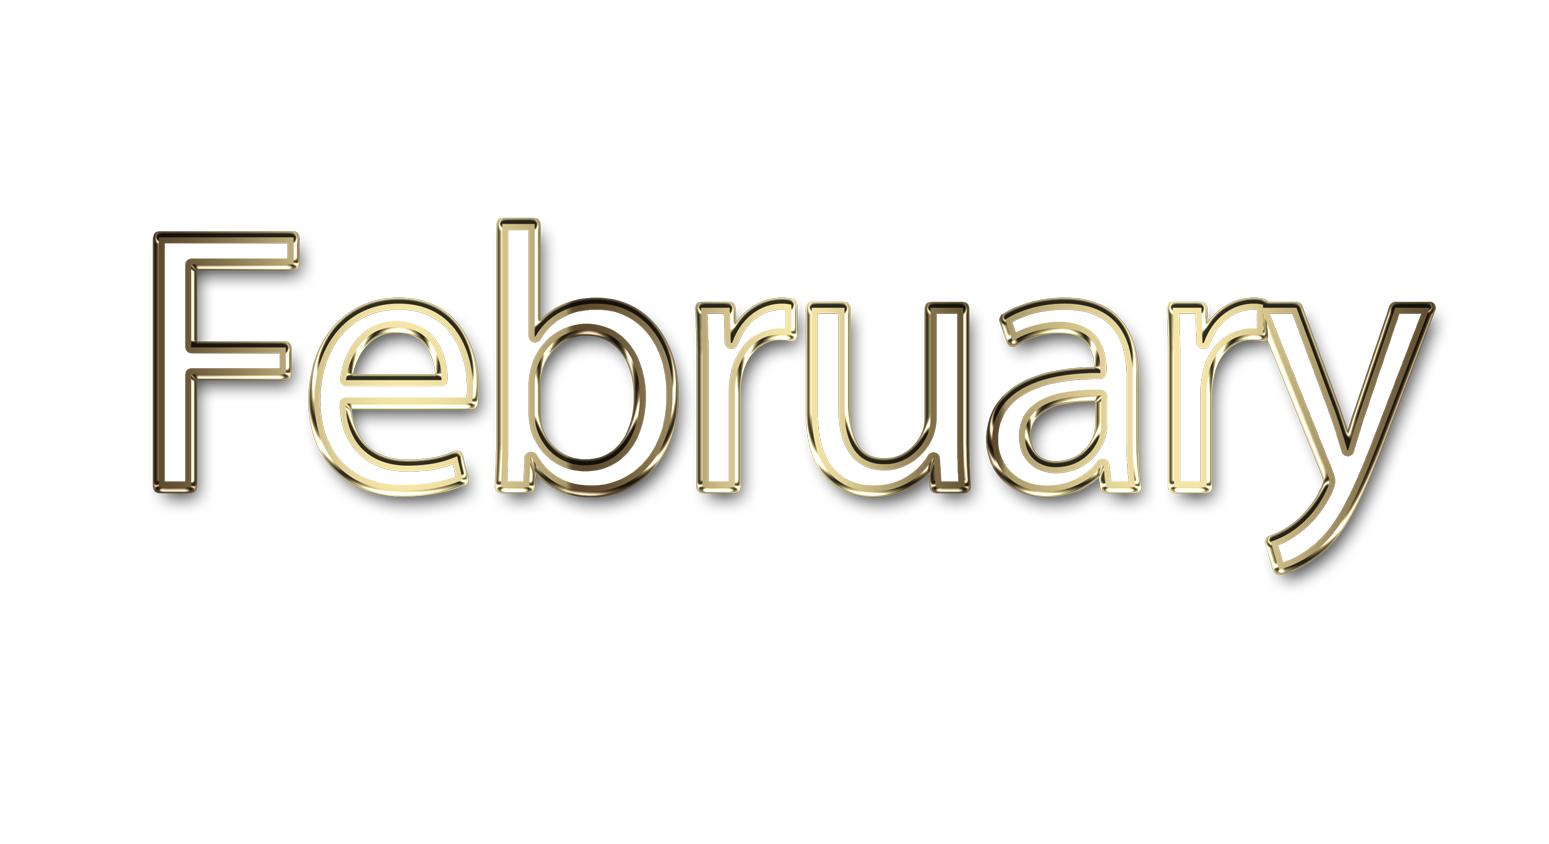 February png, word February png, February word png, February text png, February letters png, February word art typography PNG images, transparent png